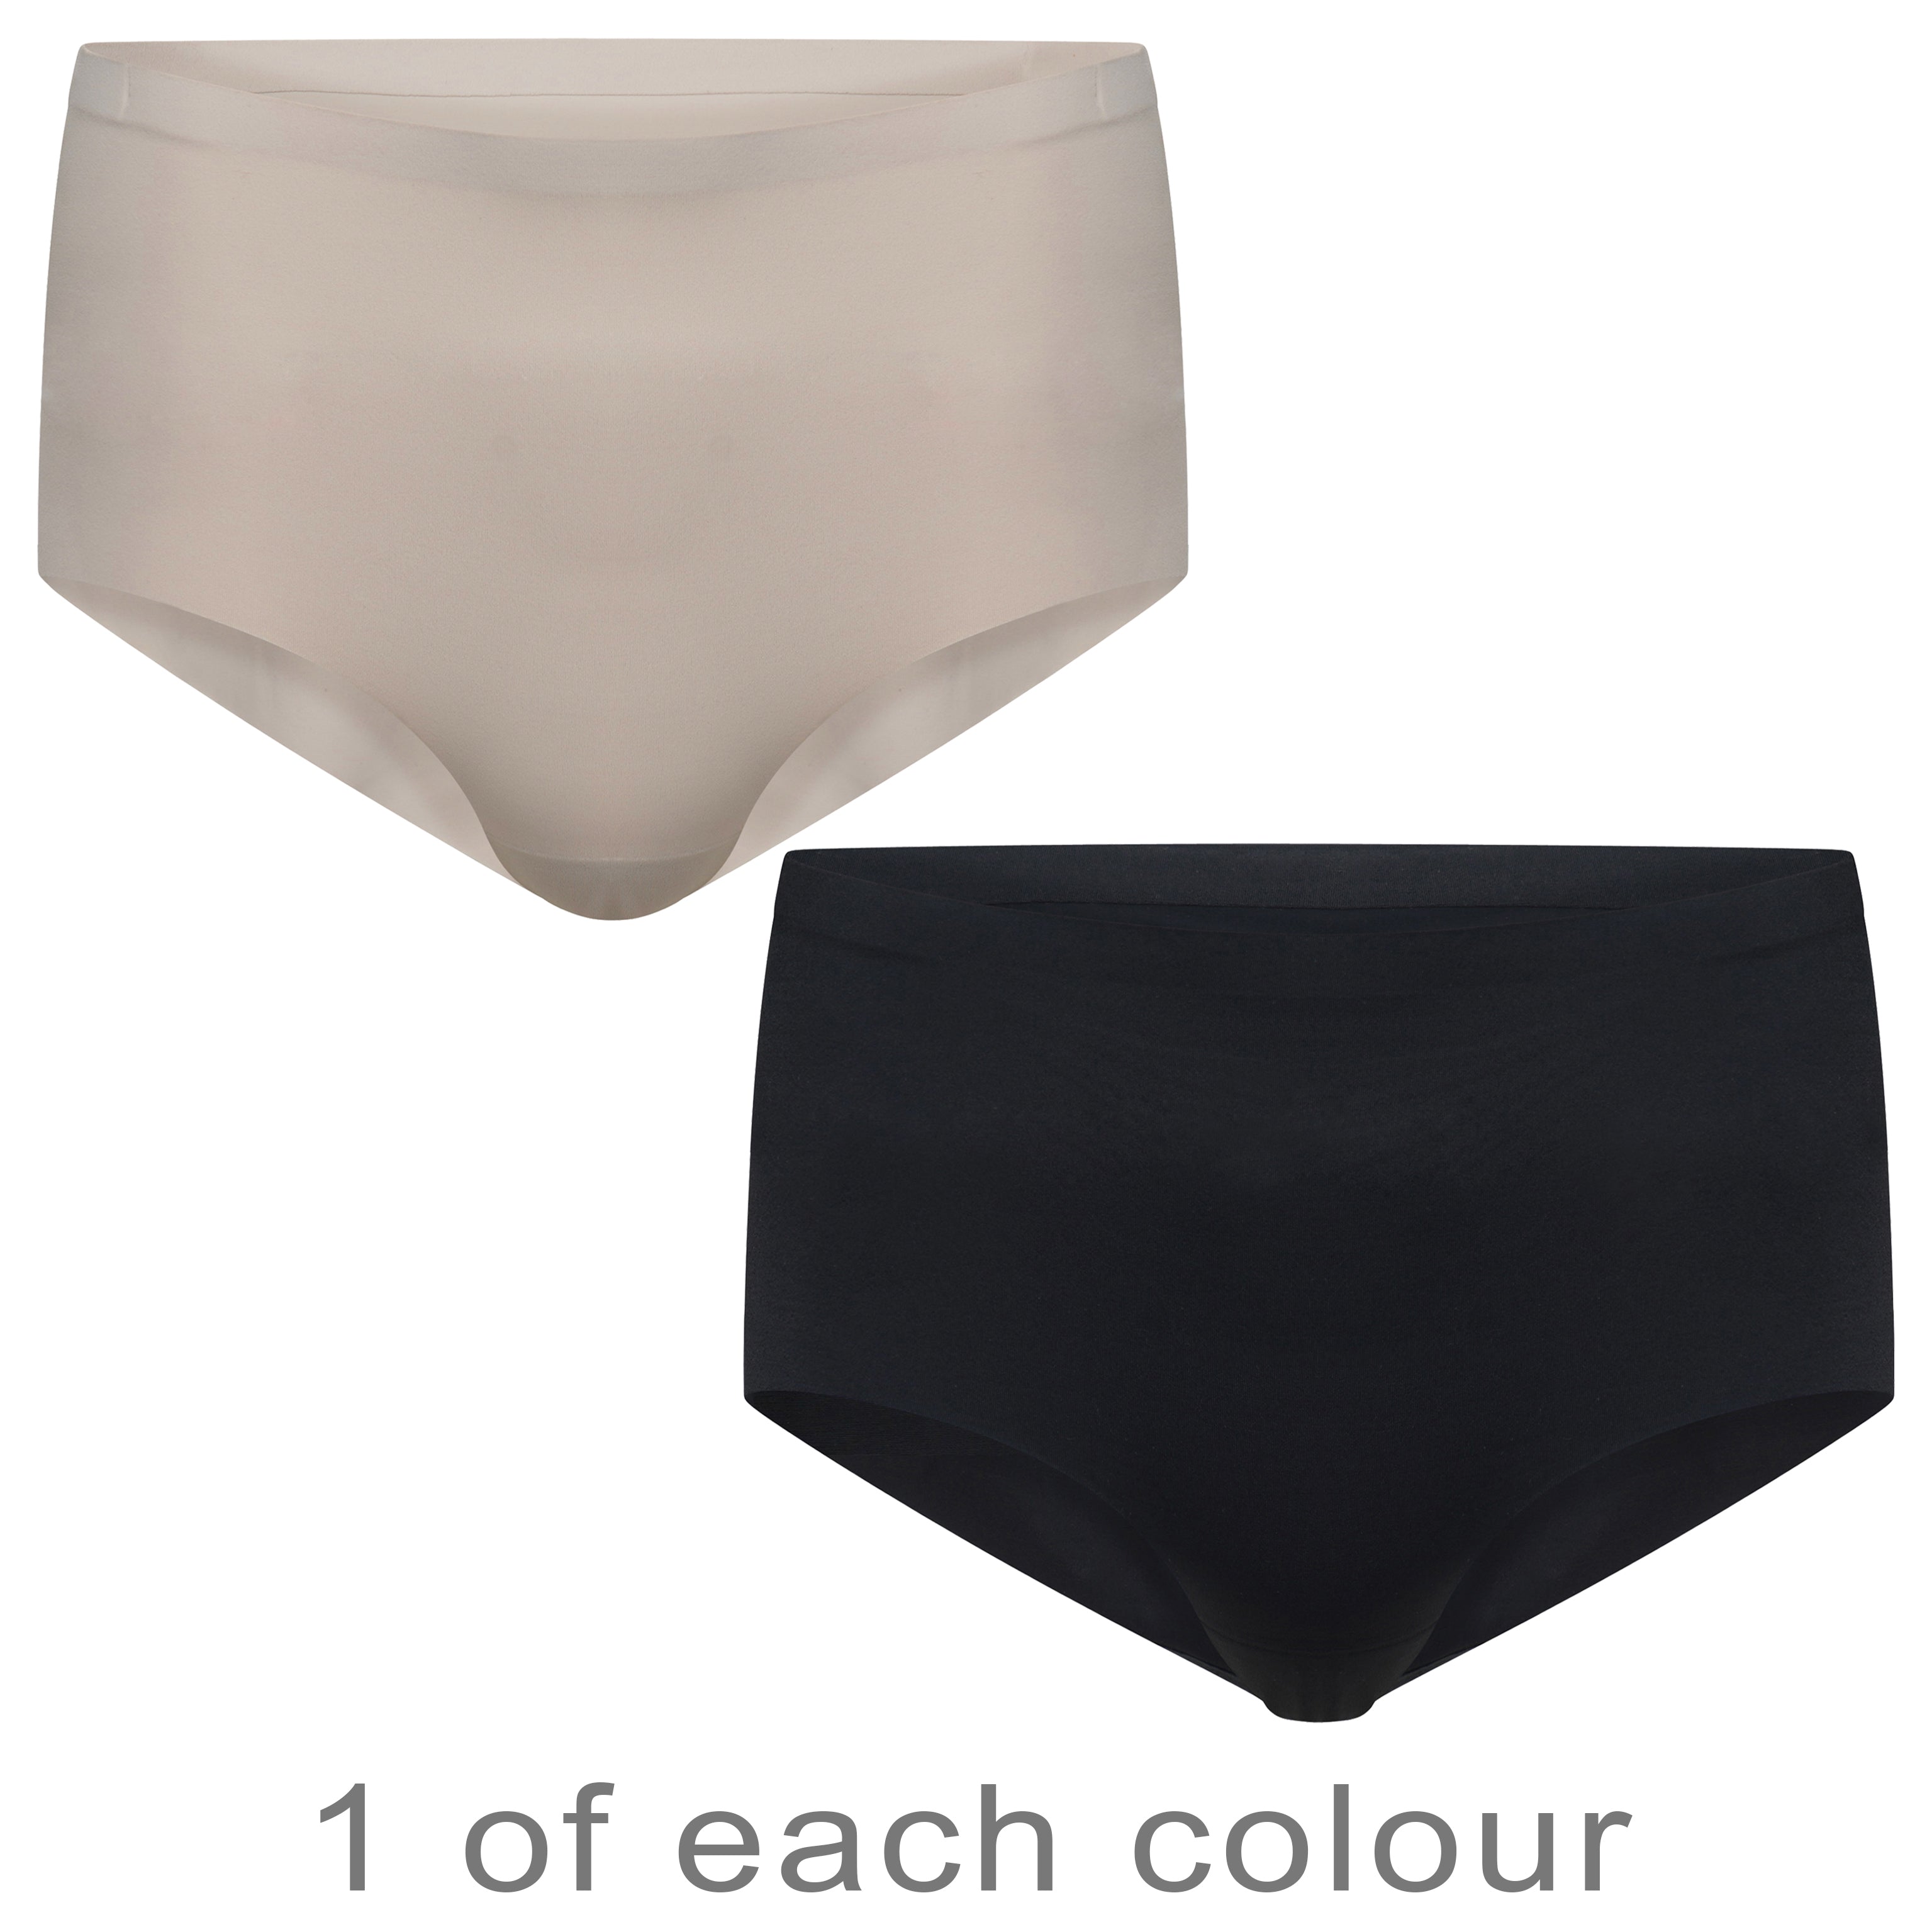 2 Pack Seamless Black and Nude Brief Knickers NO VPL Seamfree